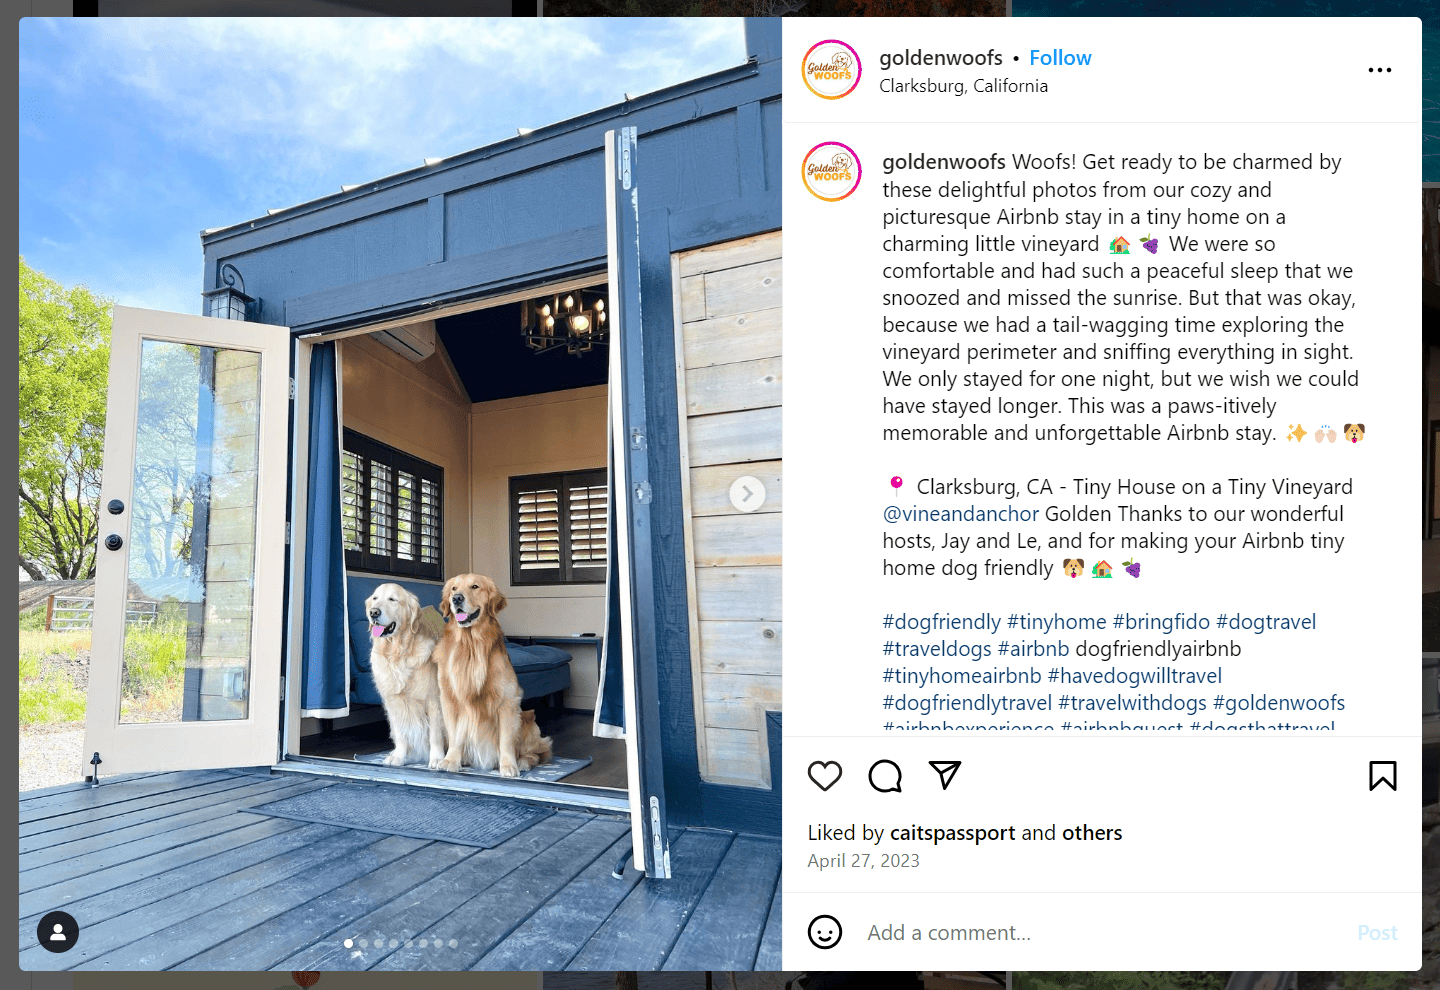 user generated post on Airbnb's Instagram account. It shows two dogs sitting in the open door of a blue cabin.